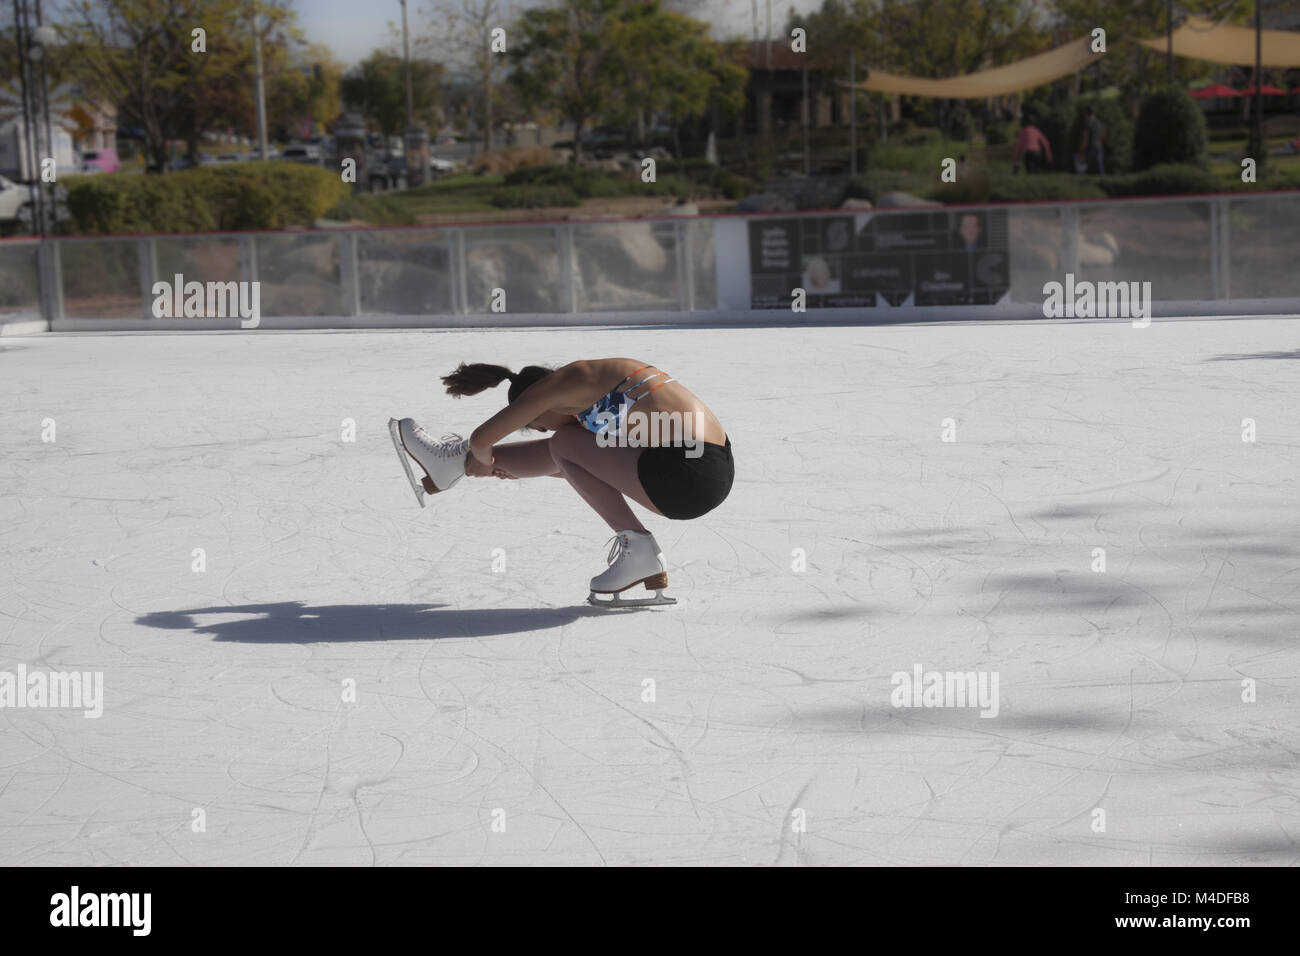 Teenage girl ice skating outdoors in shorts and a bikini top in Southern Califiornia in 85 degree winter weather Stock Photo